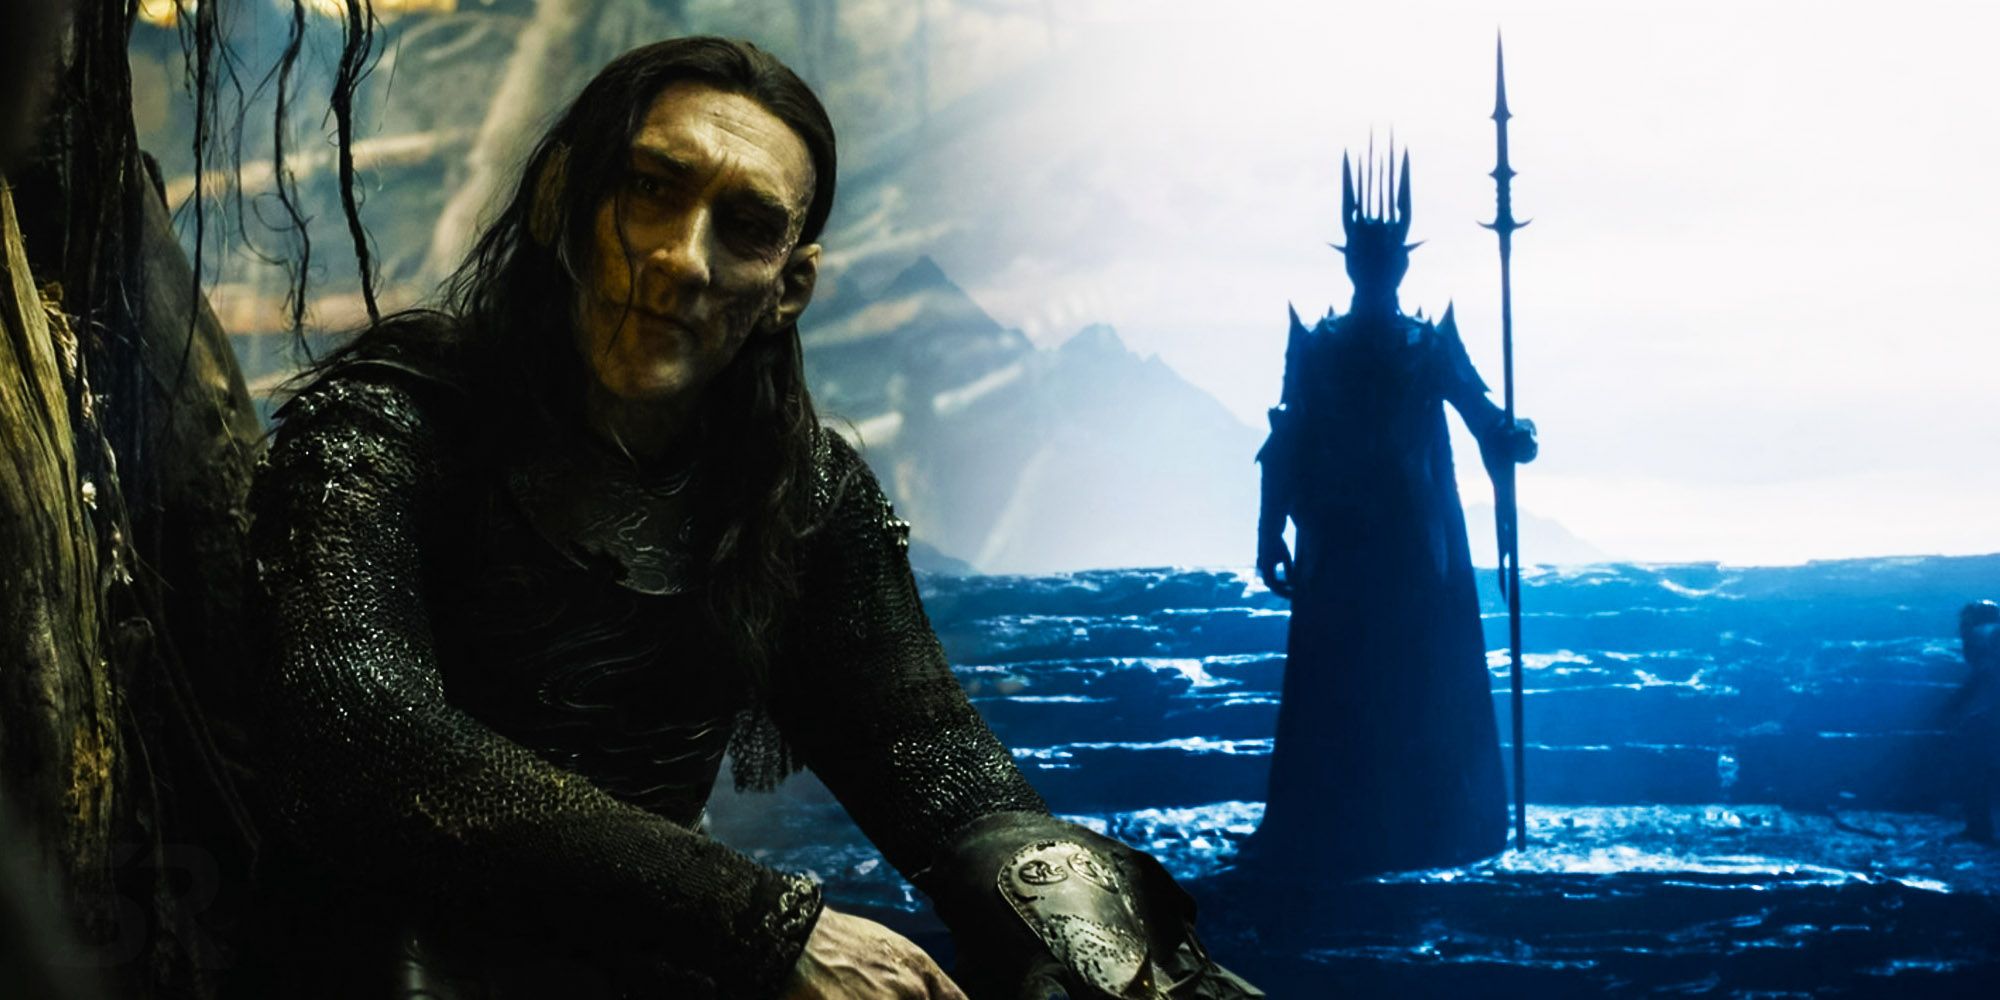 Joseph Mawle as Adar sitting down on the left and Sauron on the right in The Lord of the Rings: The Rings of Power.